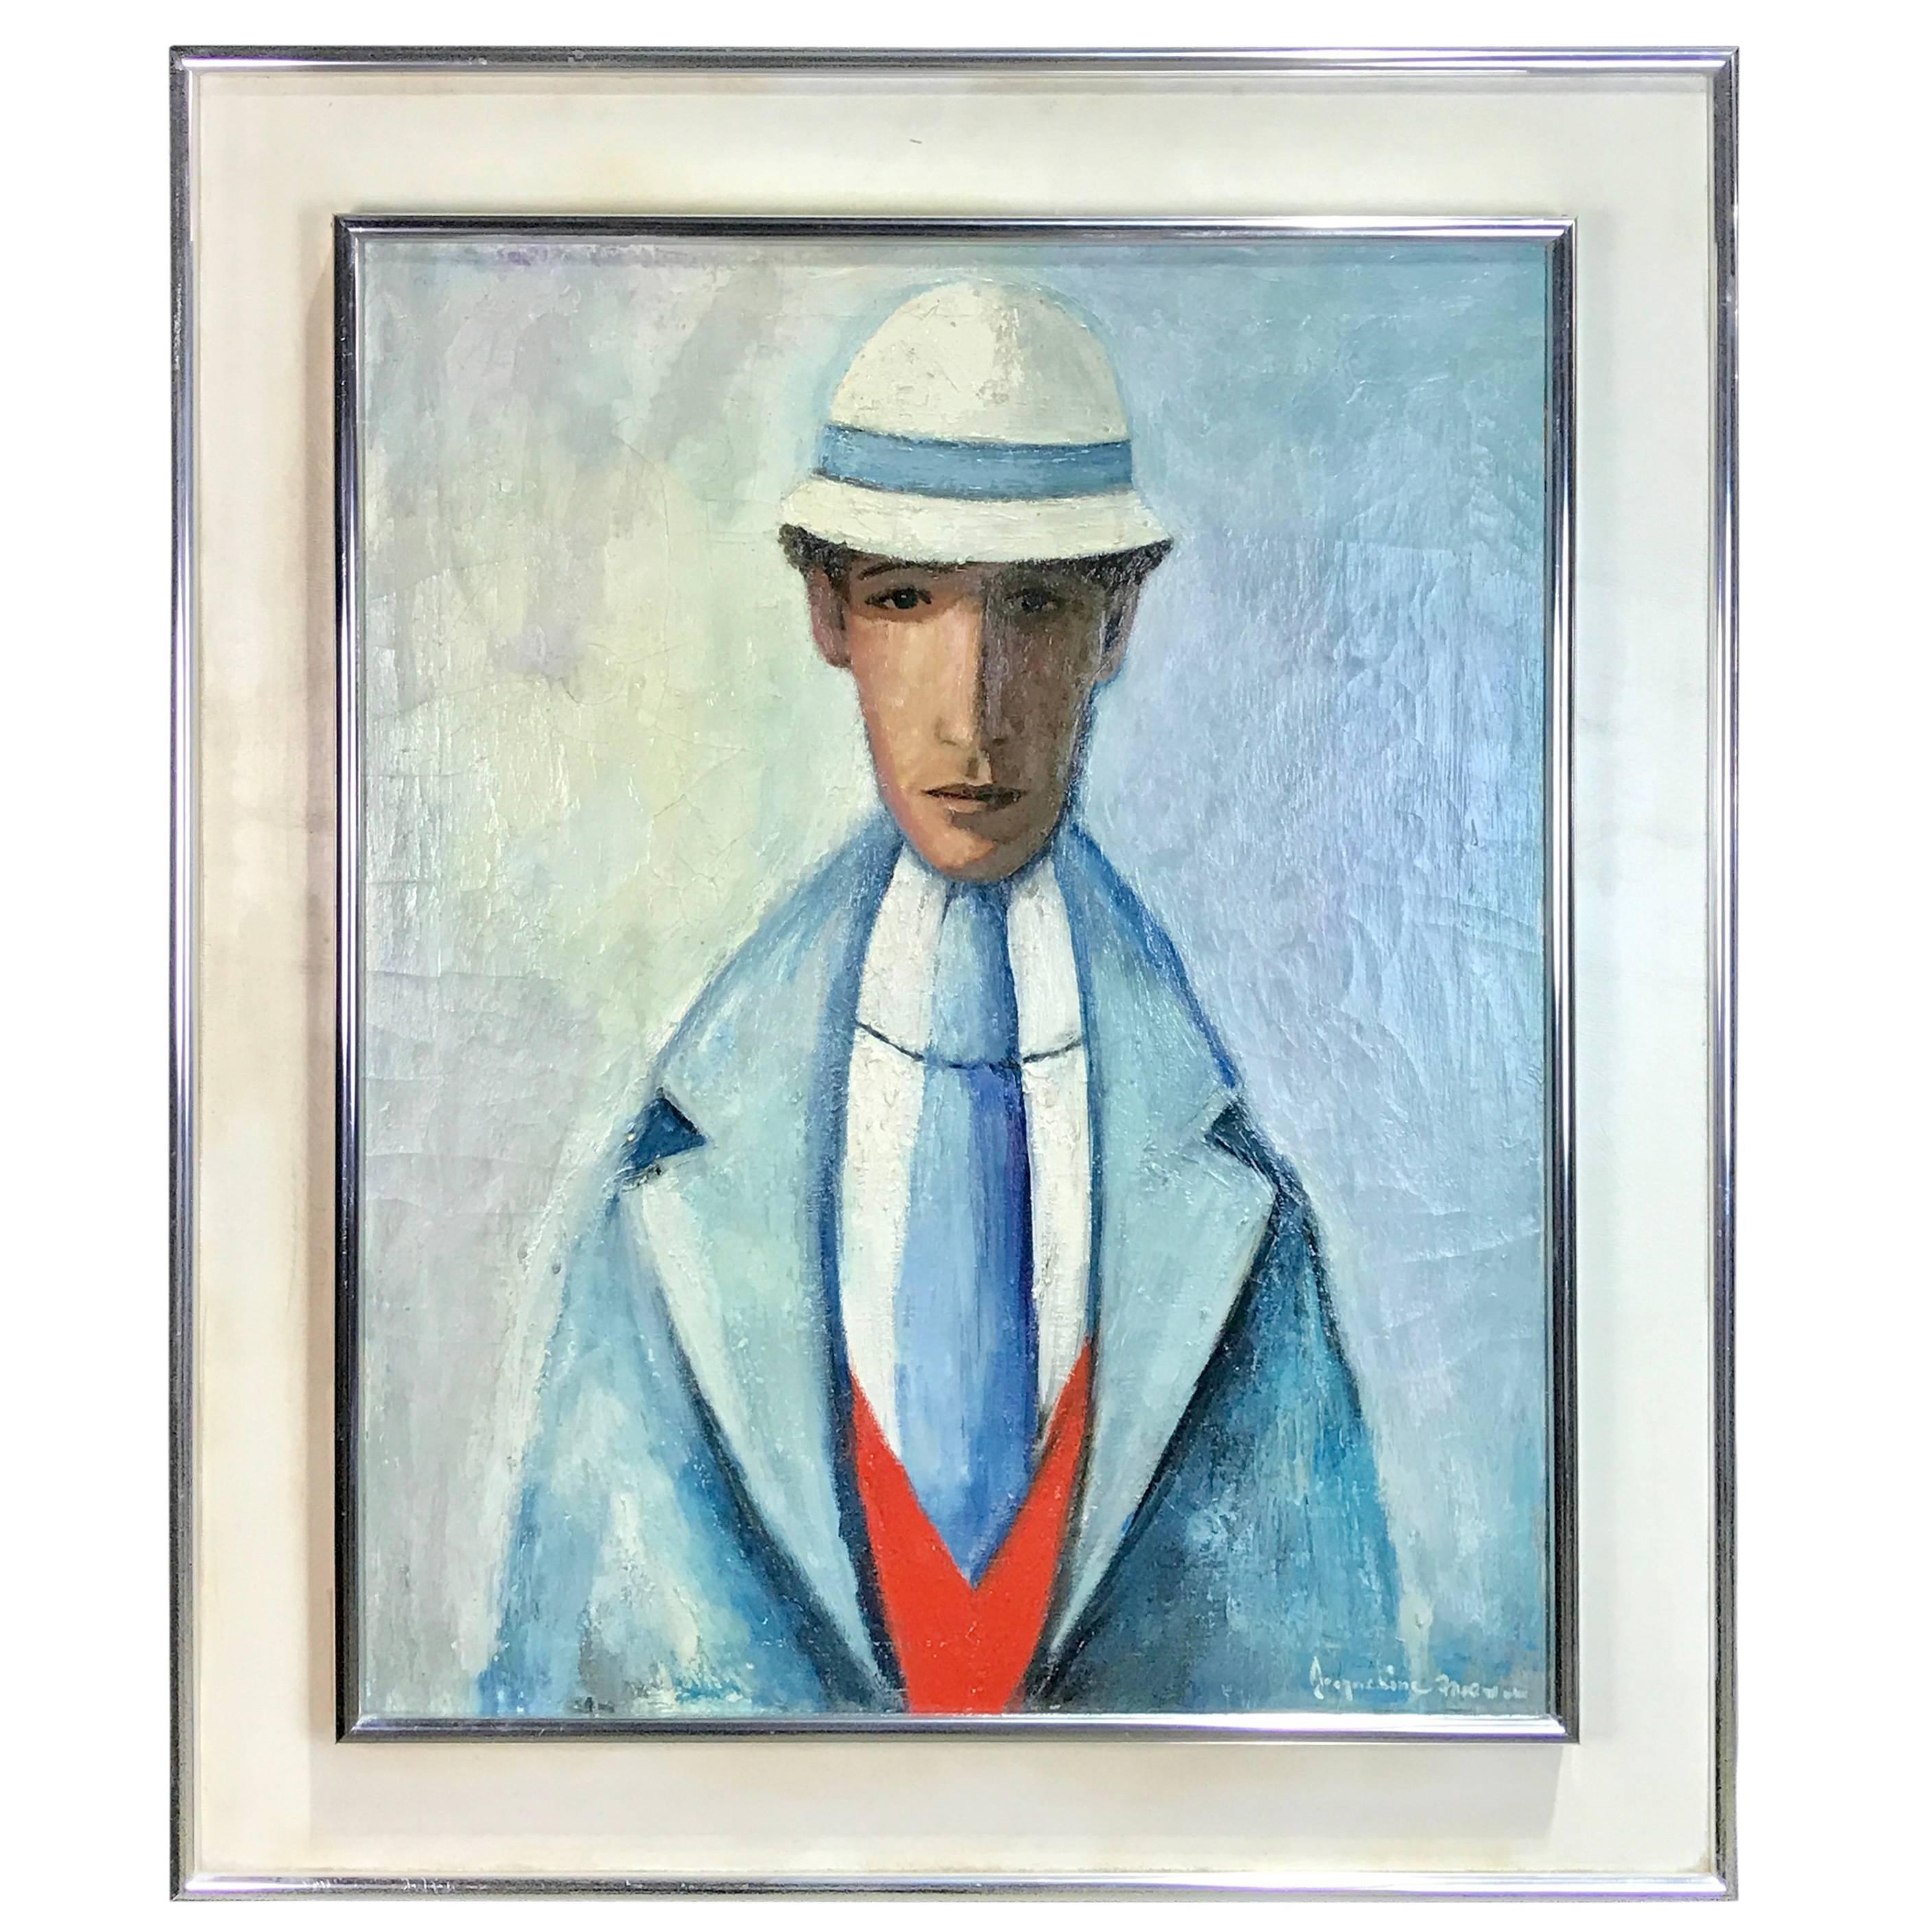 French Midcentury Portrait of a Man by Jacqueline Fromenteau